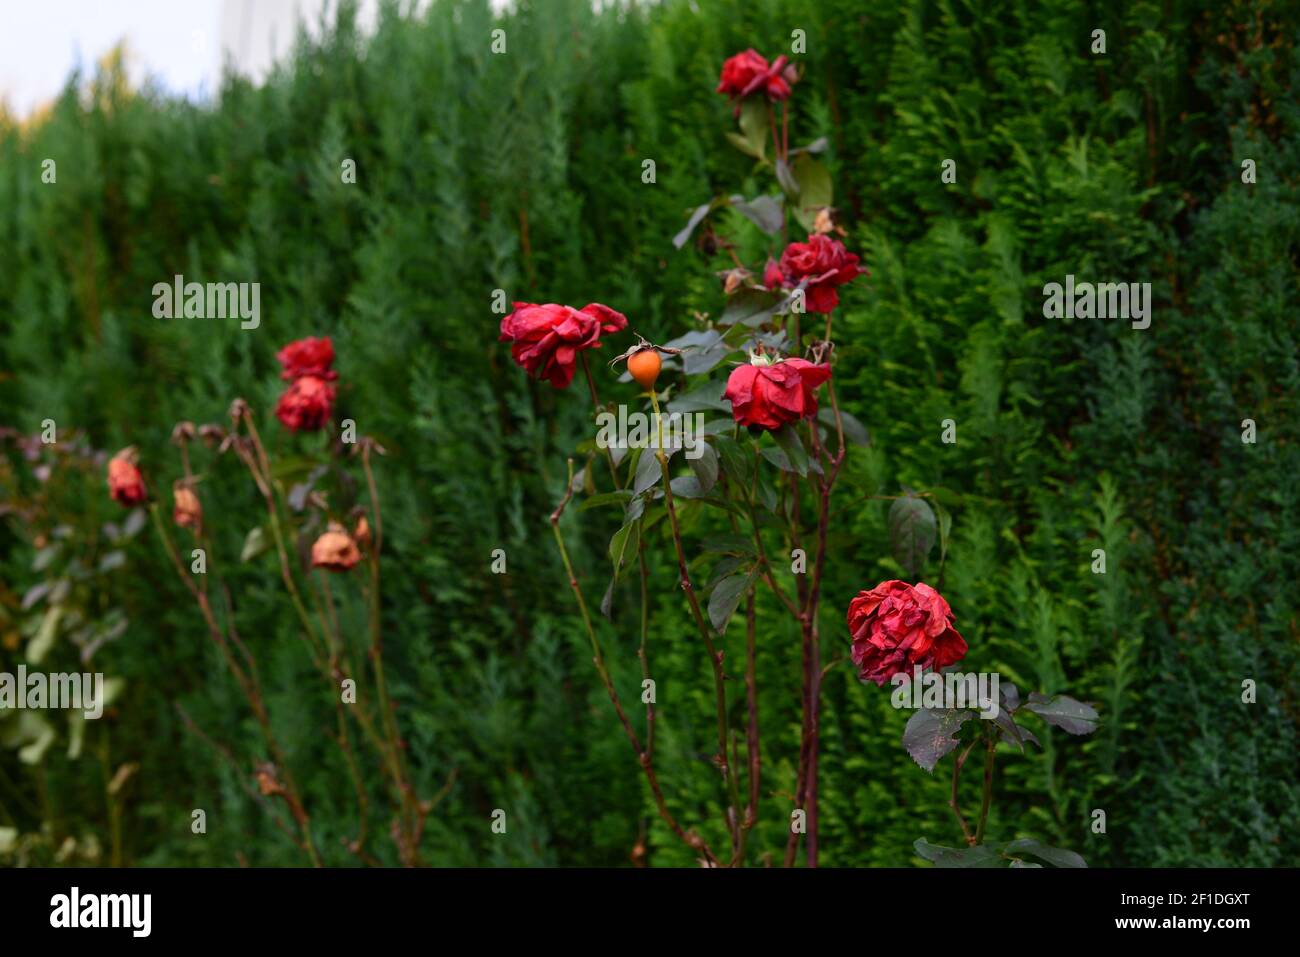 Withered red rose on a green background of a hedge. Blooming roses with fallen flowers. Red flowers growing for winter. Withered flowers in autumn tim Stock Photo